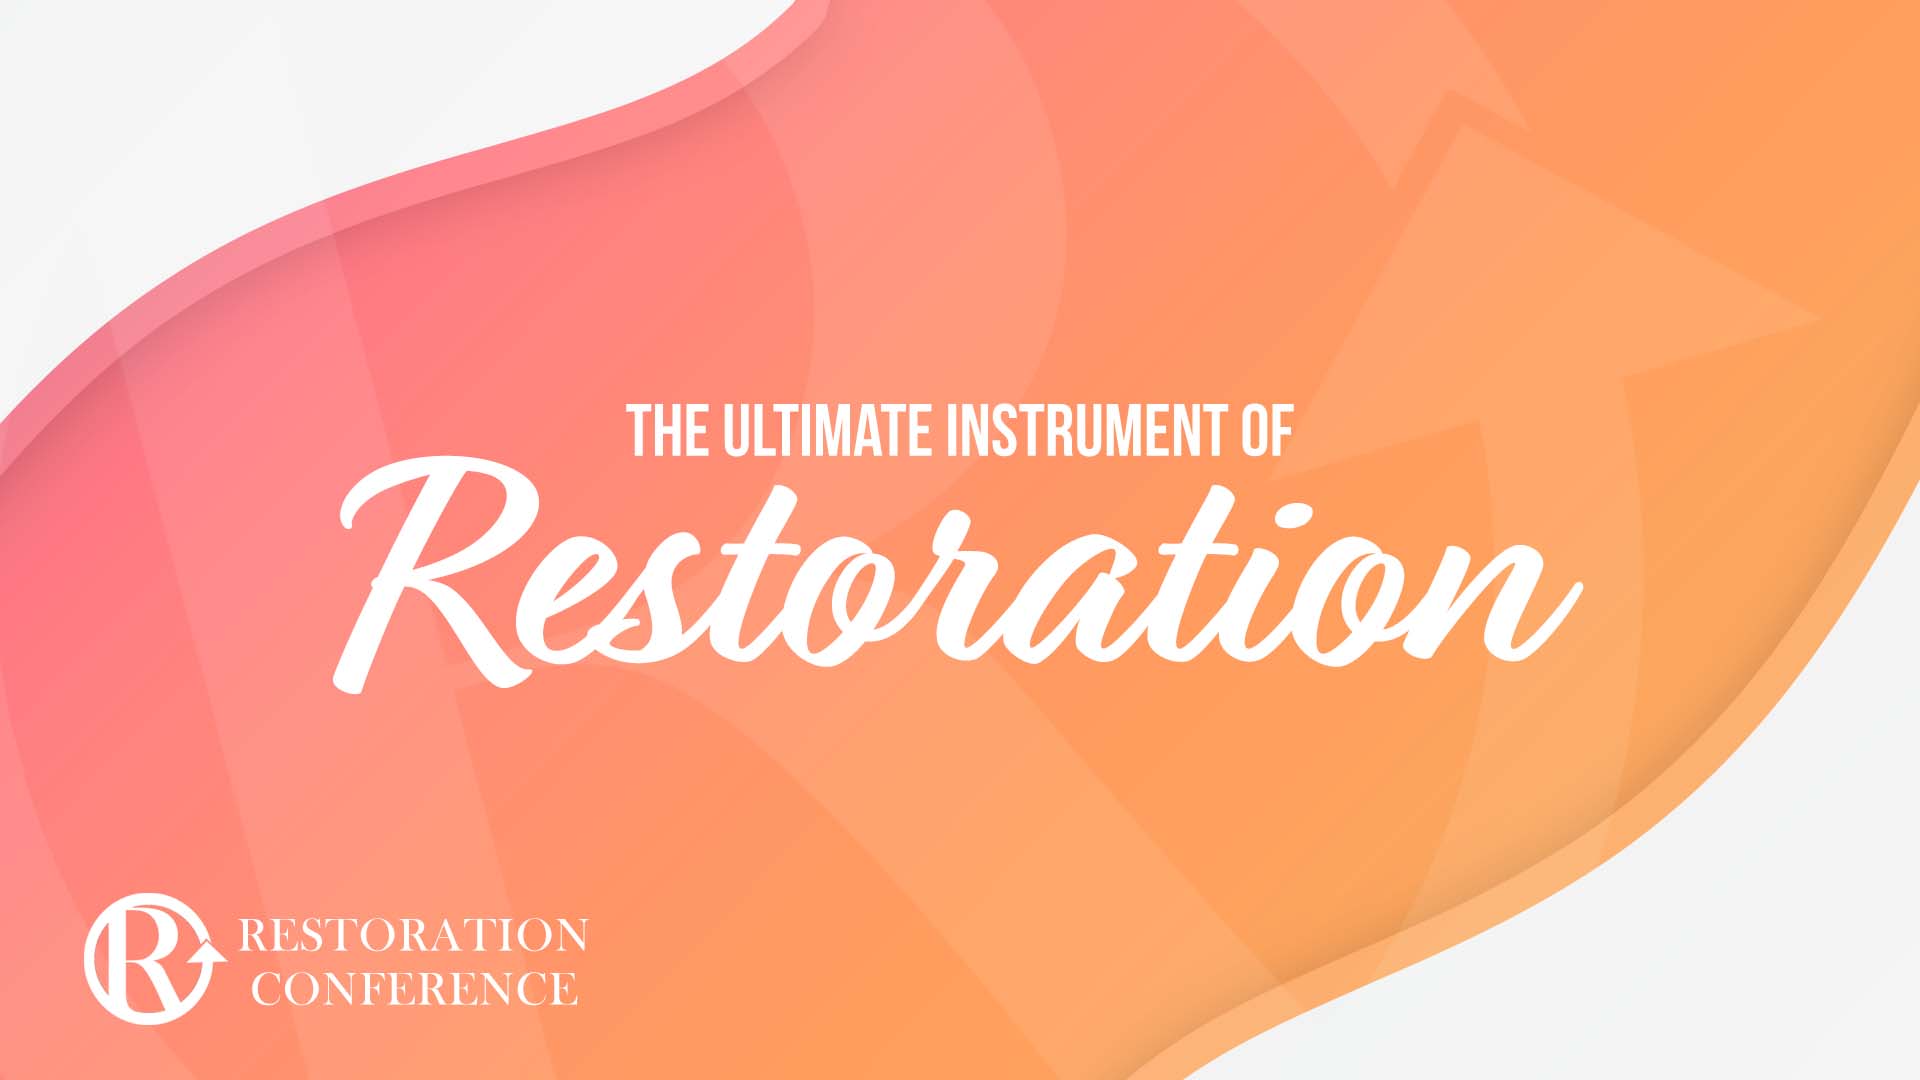 The Ultimate Instrument of Restoration